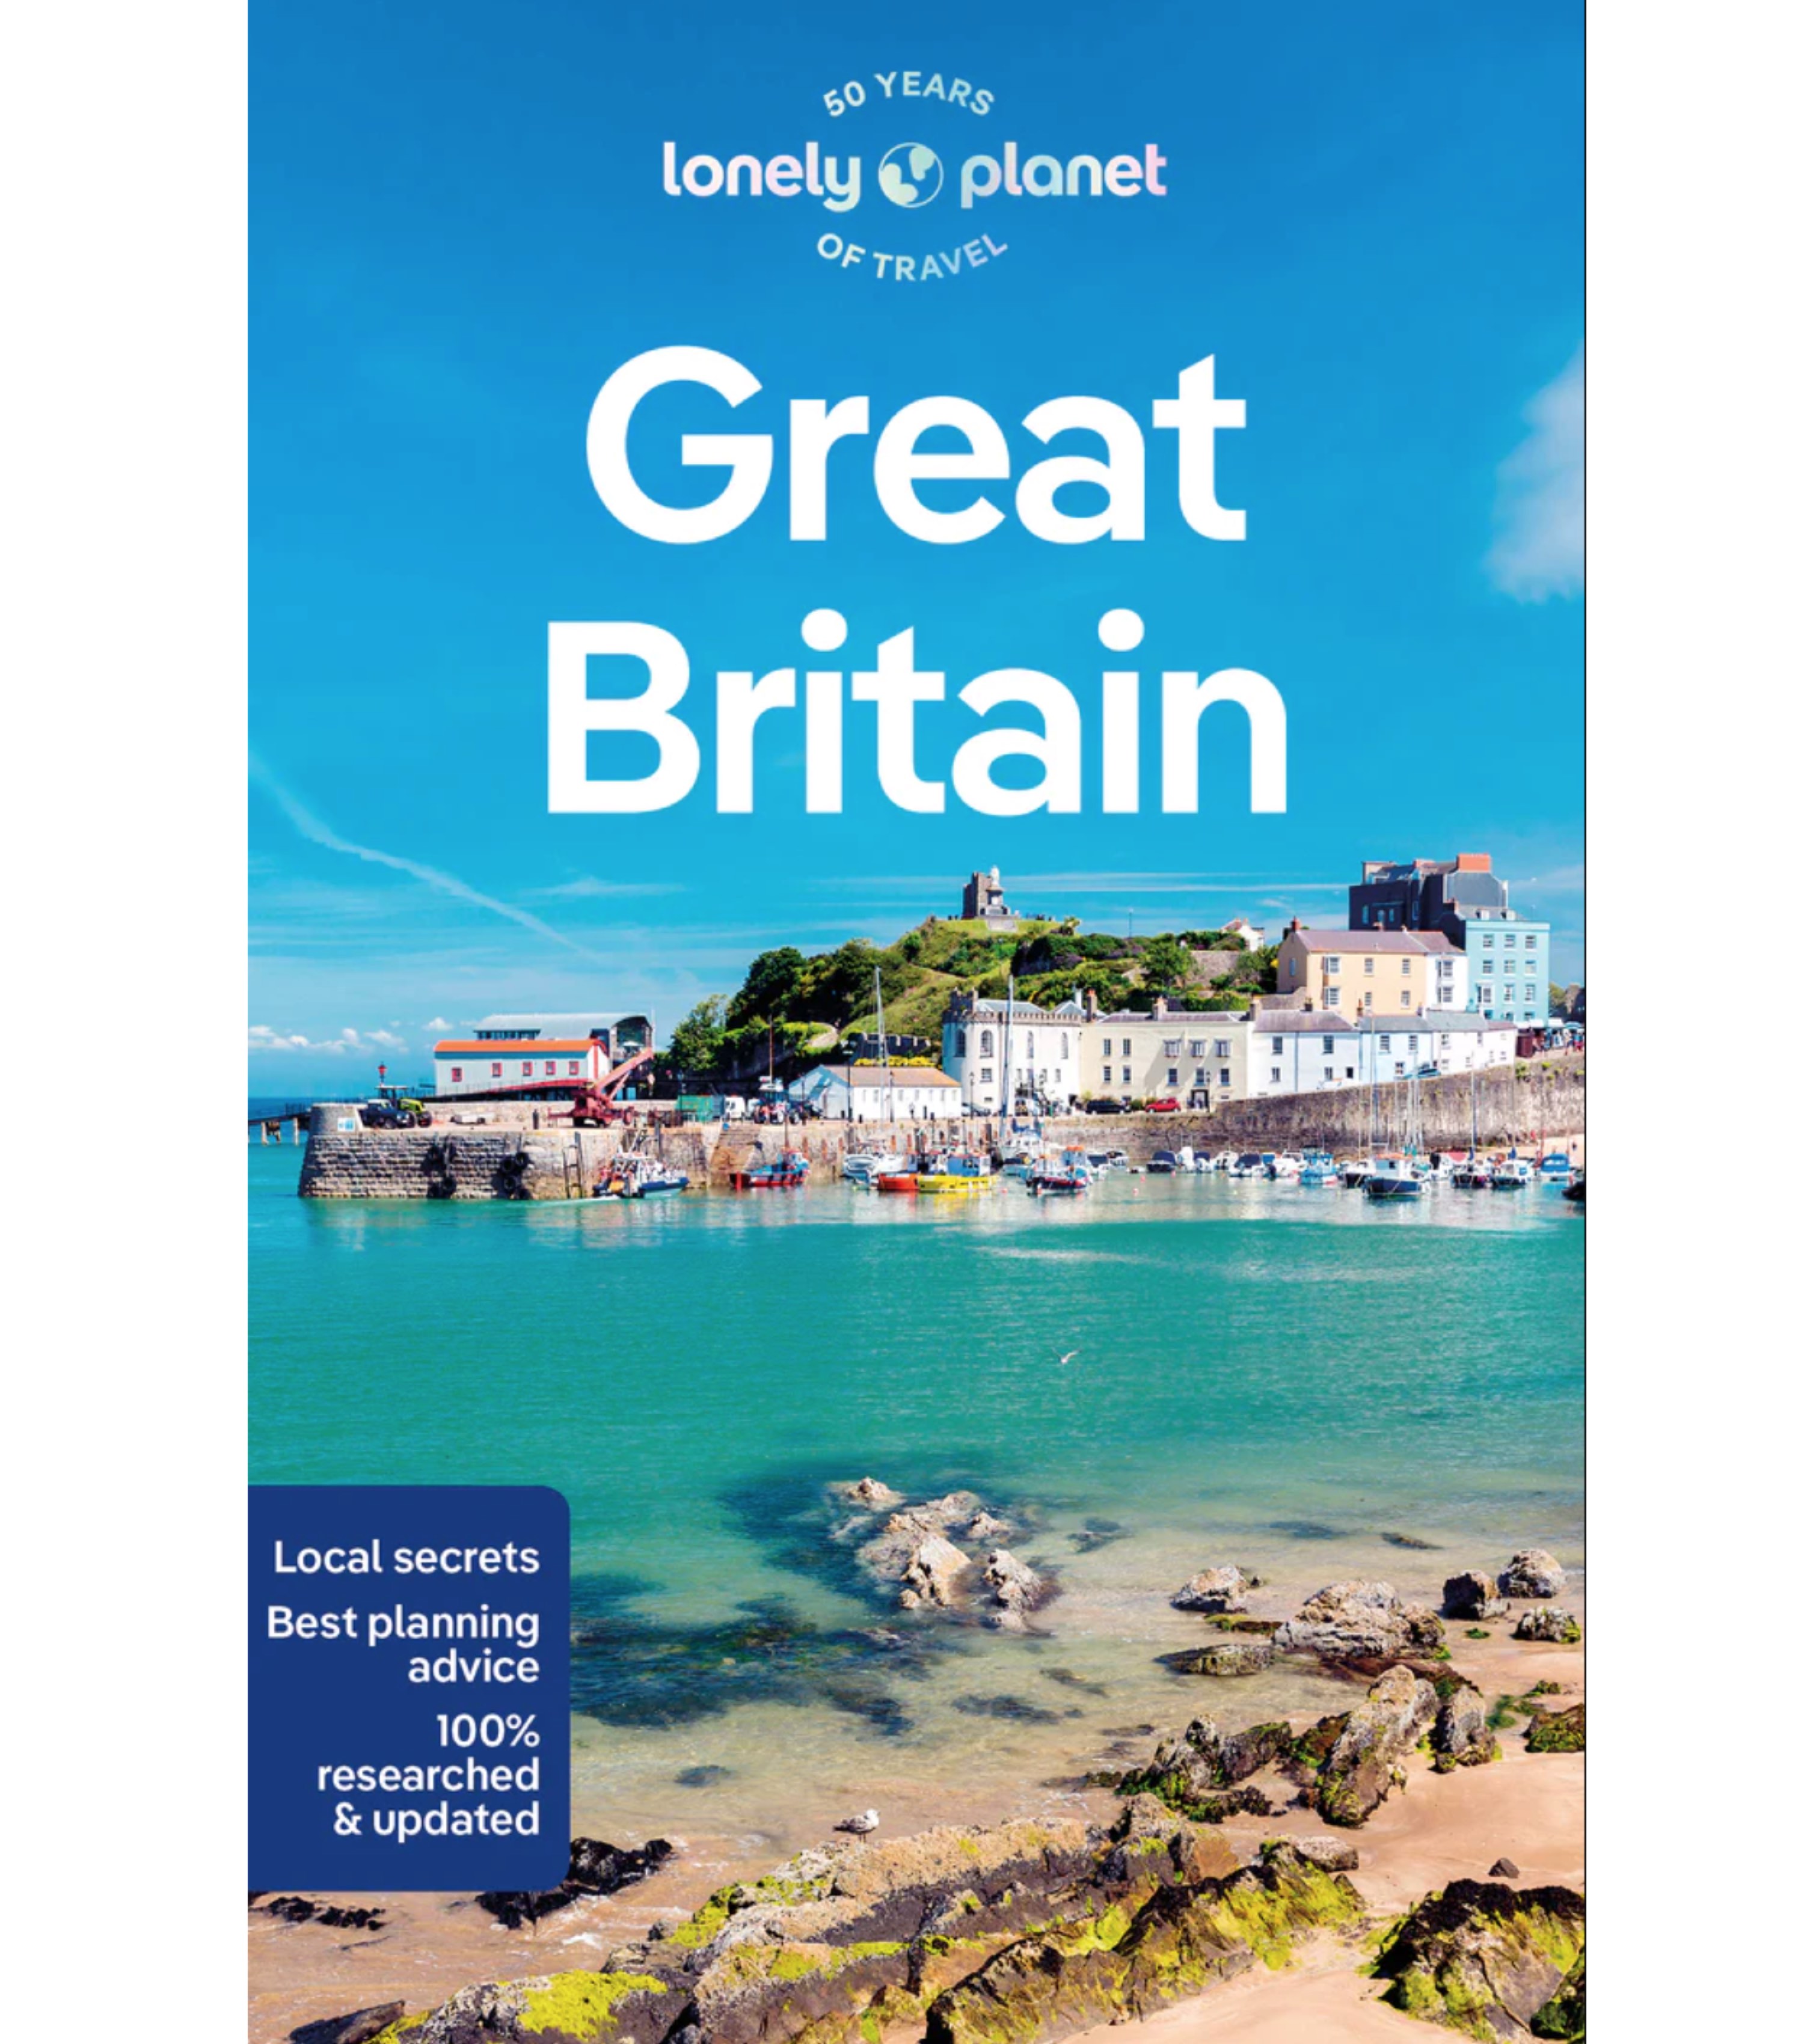 Planet　by　Lonely　Lonely　Planet　15　Edition　Great　Britain　(9781838693541)